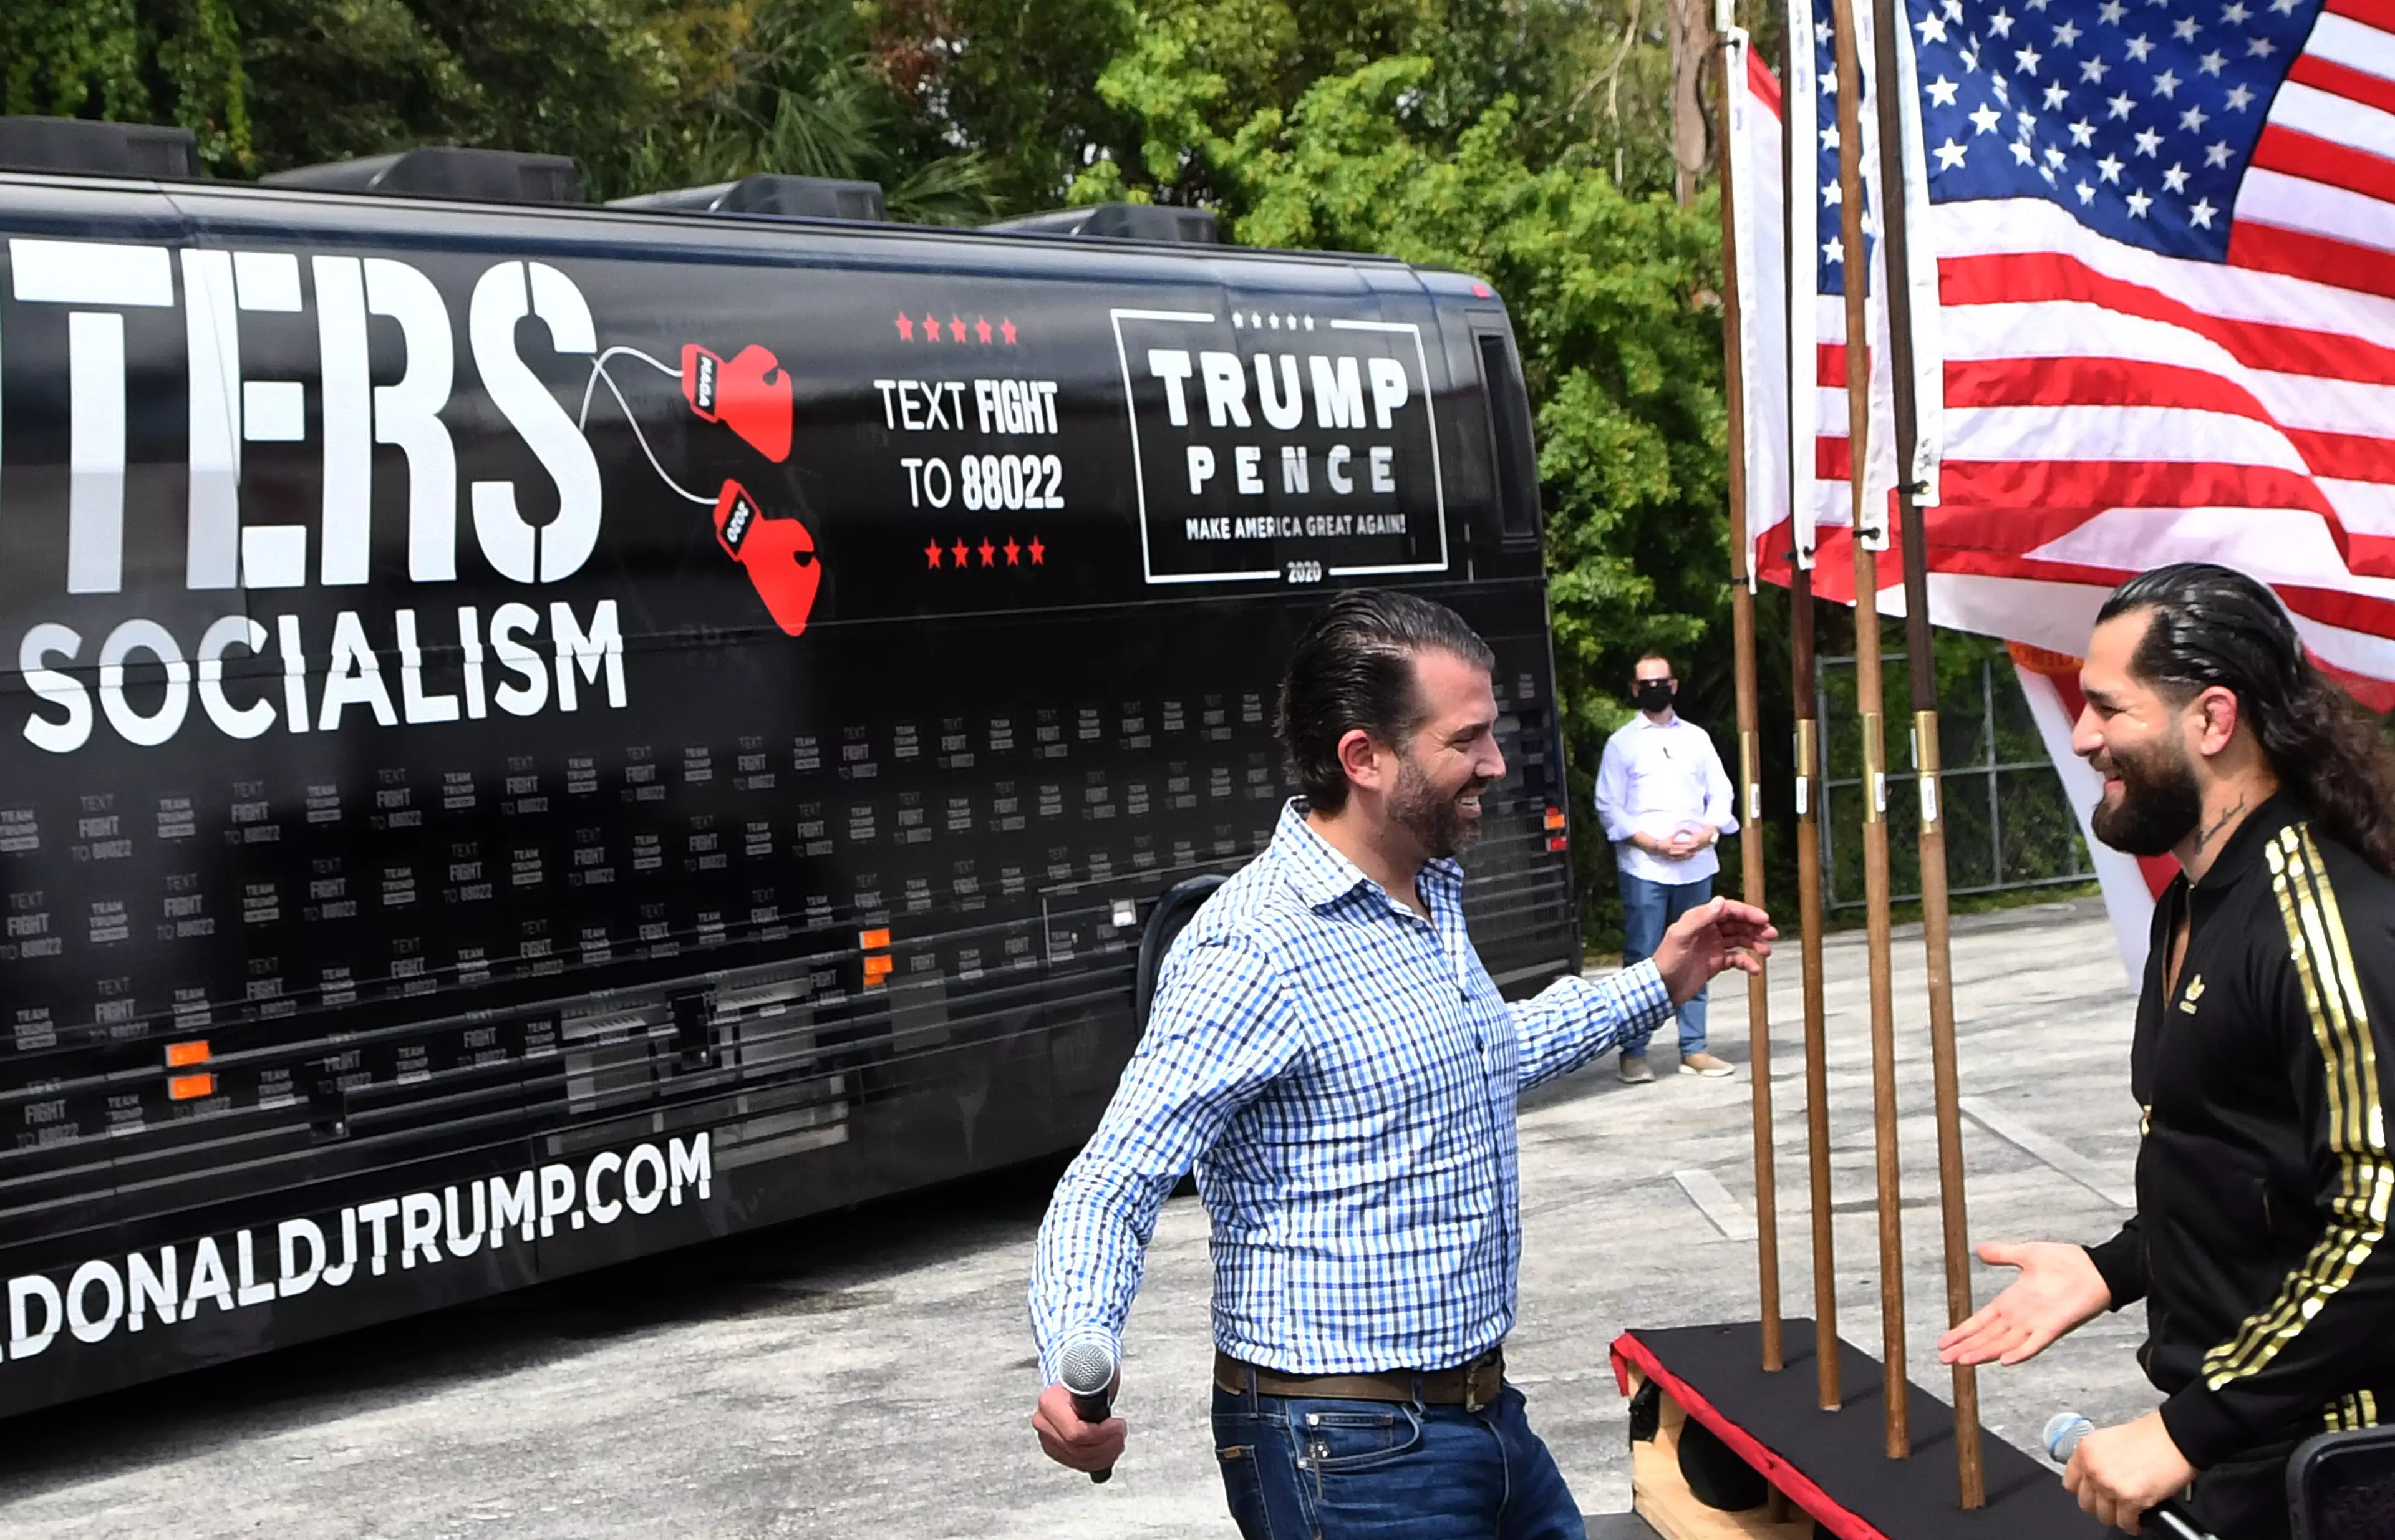 Jorge Masvidal joined Donald Trump Jnr on the 'Fighters Against Socialism' tour.